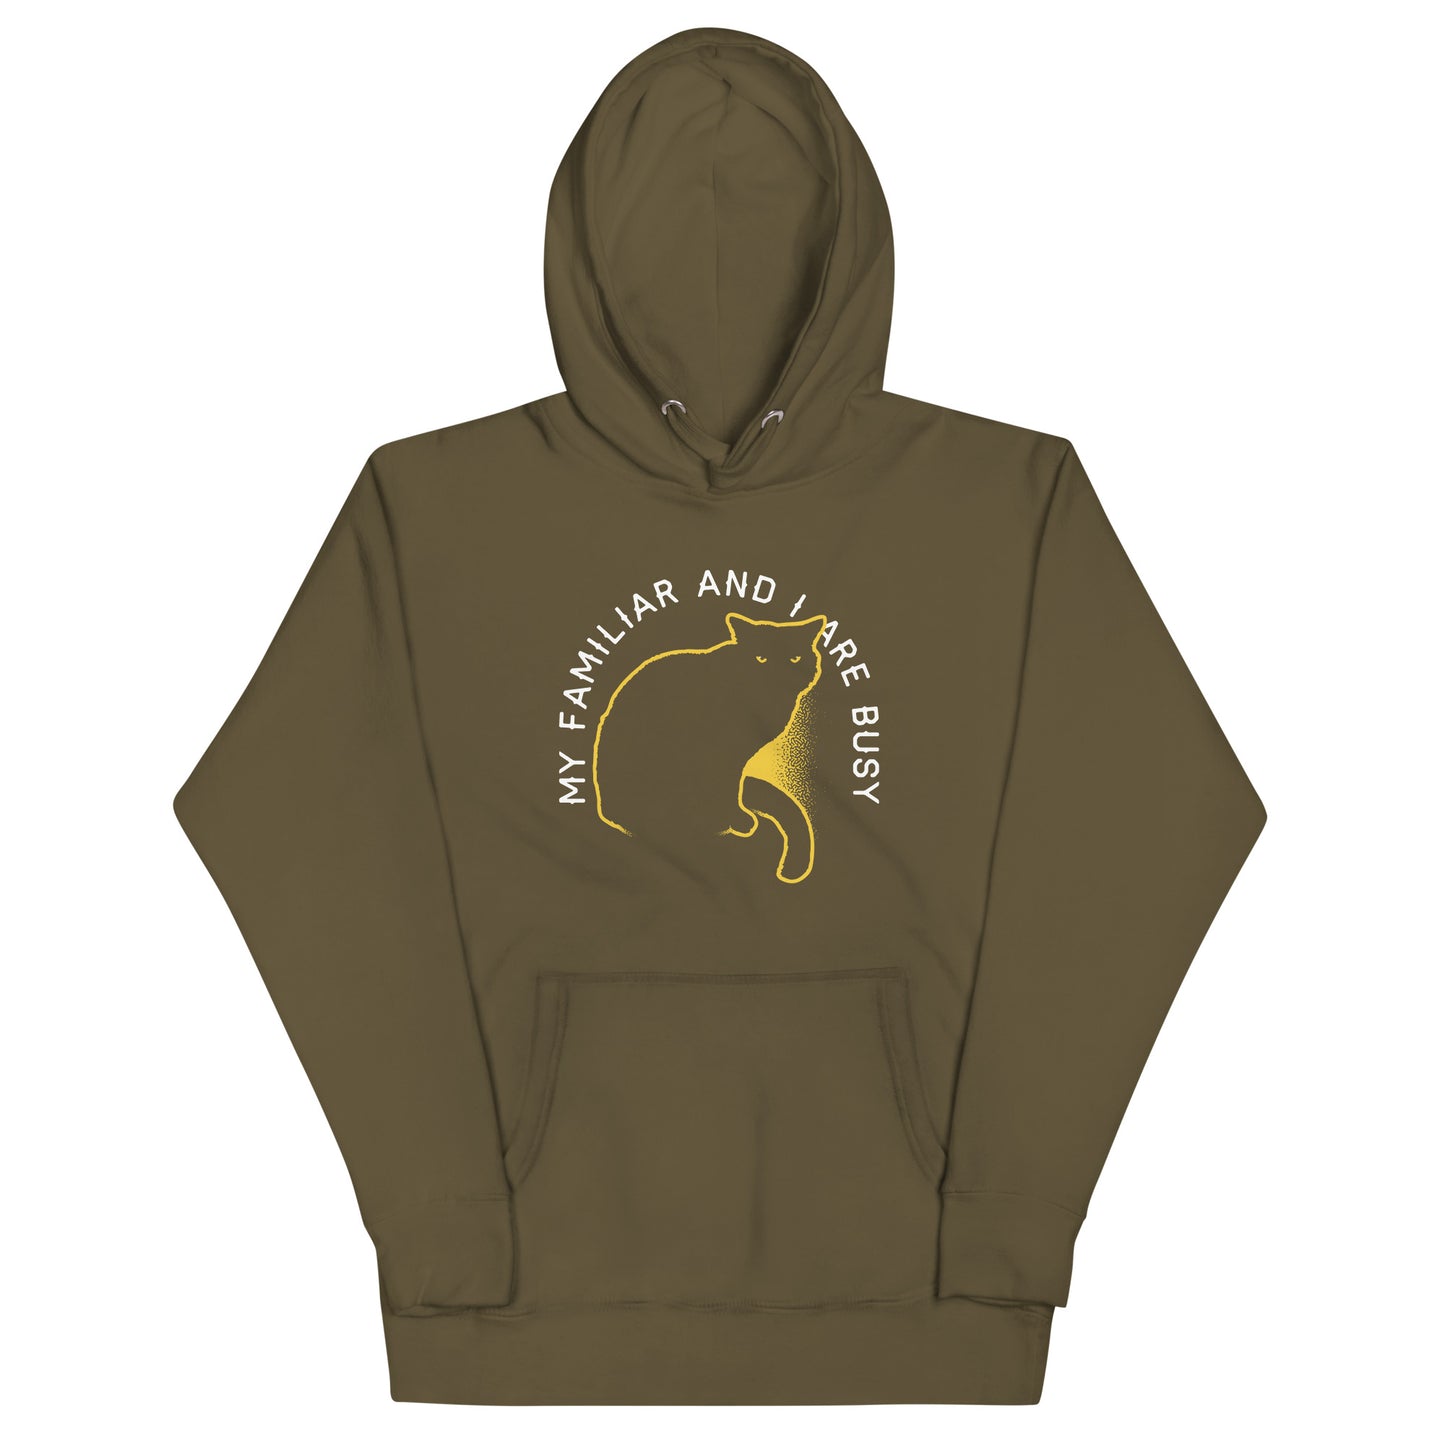 My Familiar And I Are Busy Unisex Hoodie